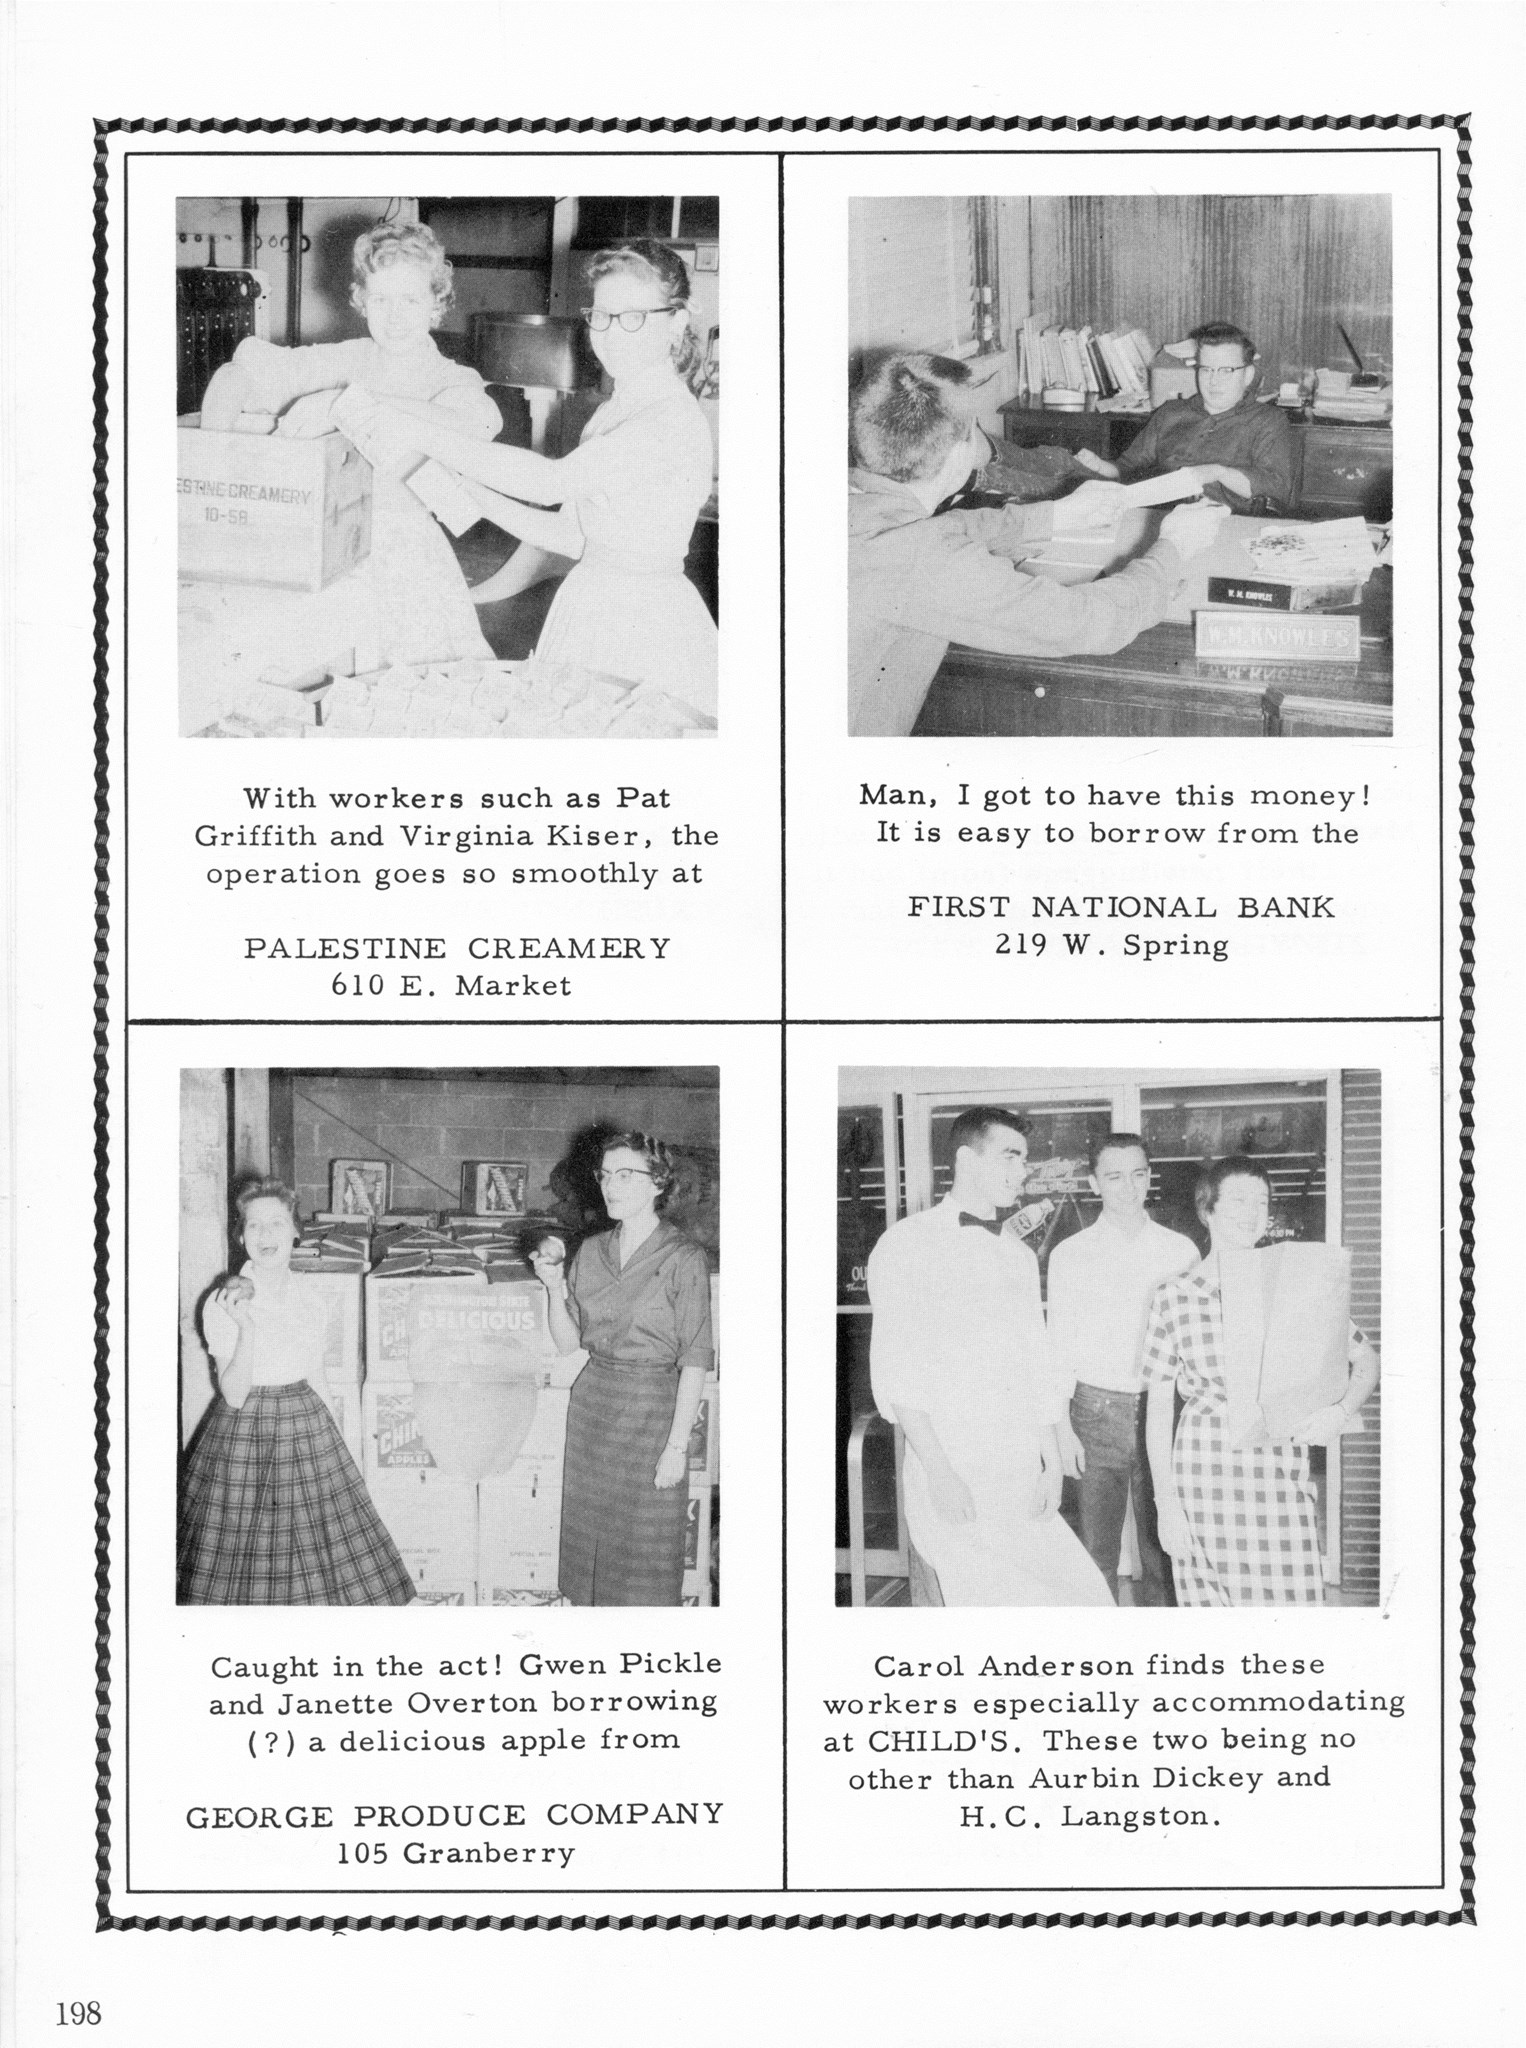 ../../../Images/Large/1959/Arclight-1959-pg0198.jpg